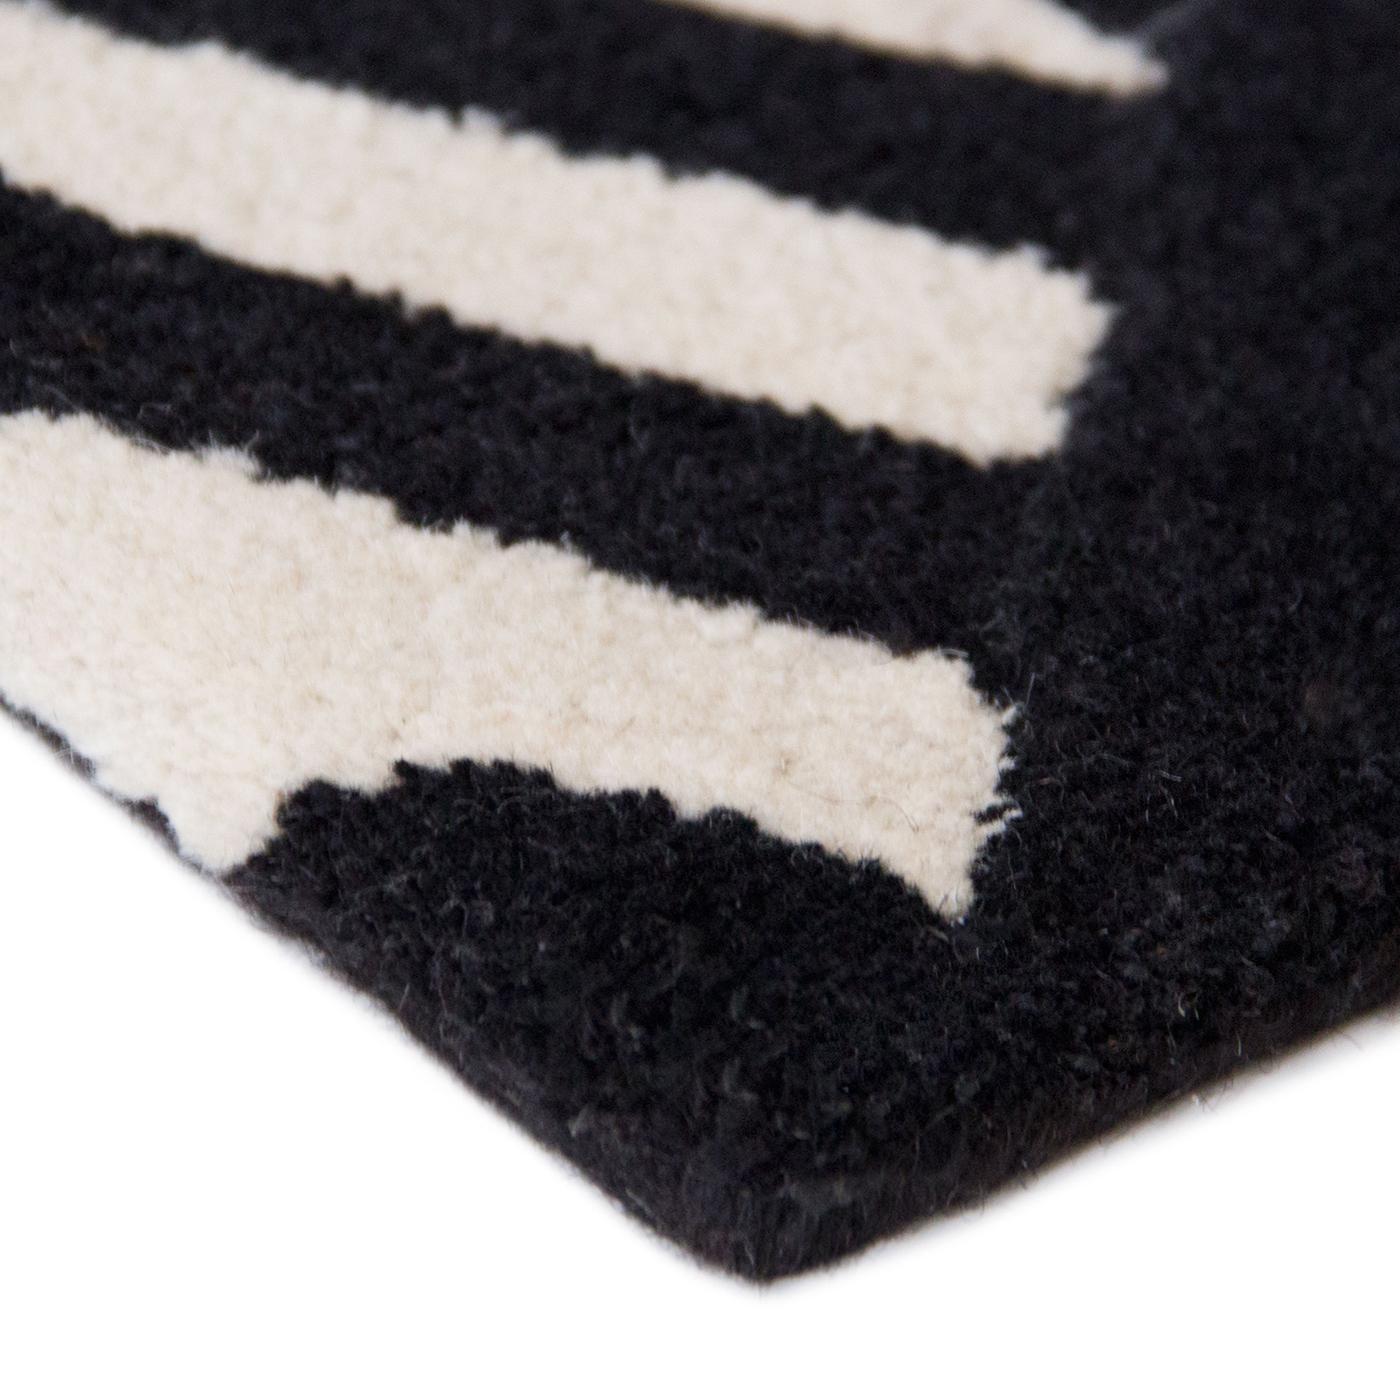 Designed by Serena Confalonieri, this captivating rug is a mesmerizing addition to a modern interior. It is crafted by master artisans using exclusively virgin wool sourced in New Zealand and boasts a geometric motif of juxtaposing black and white